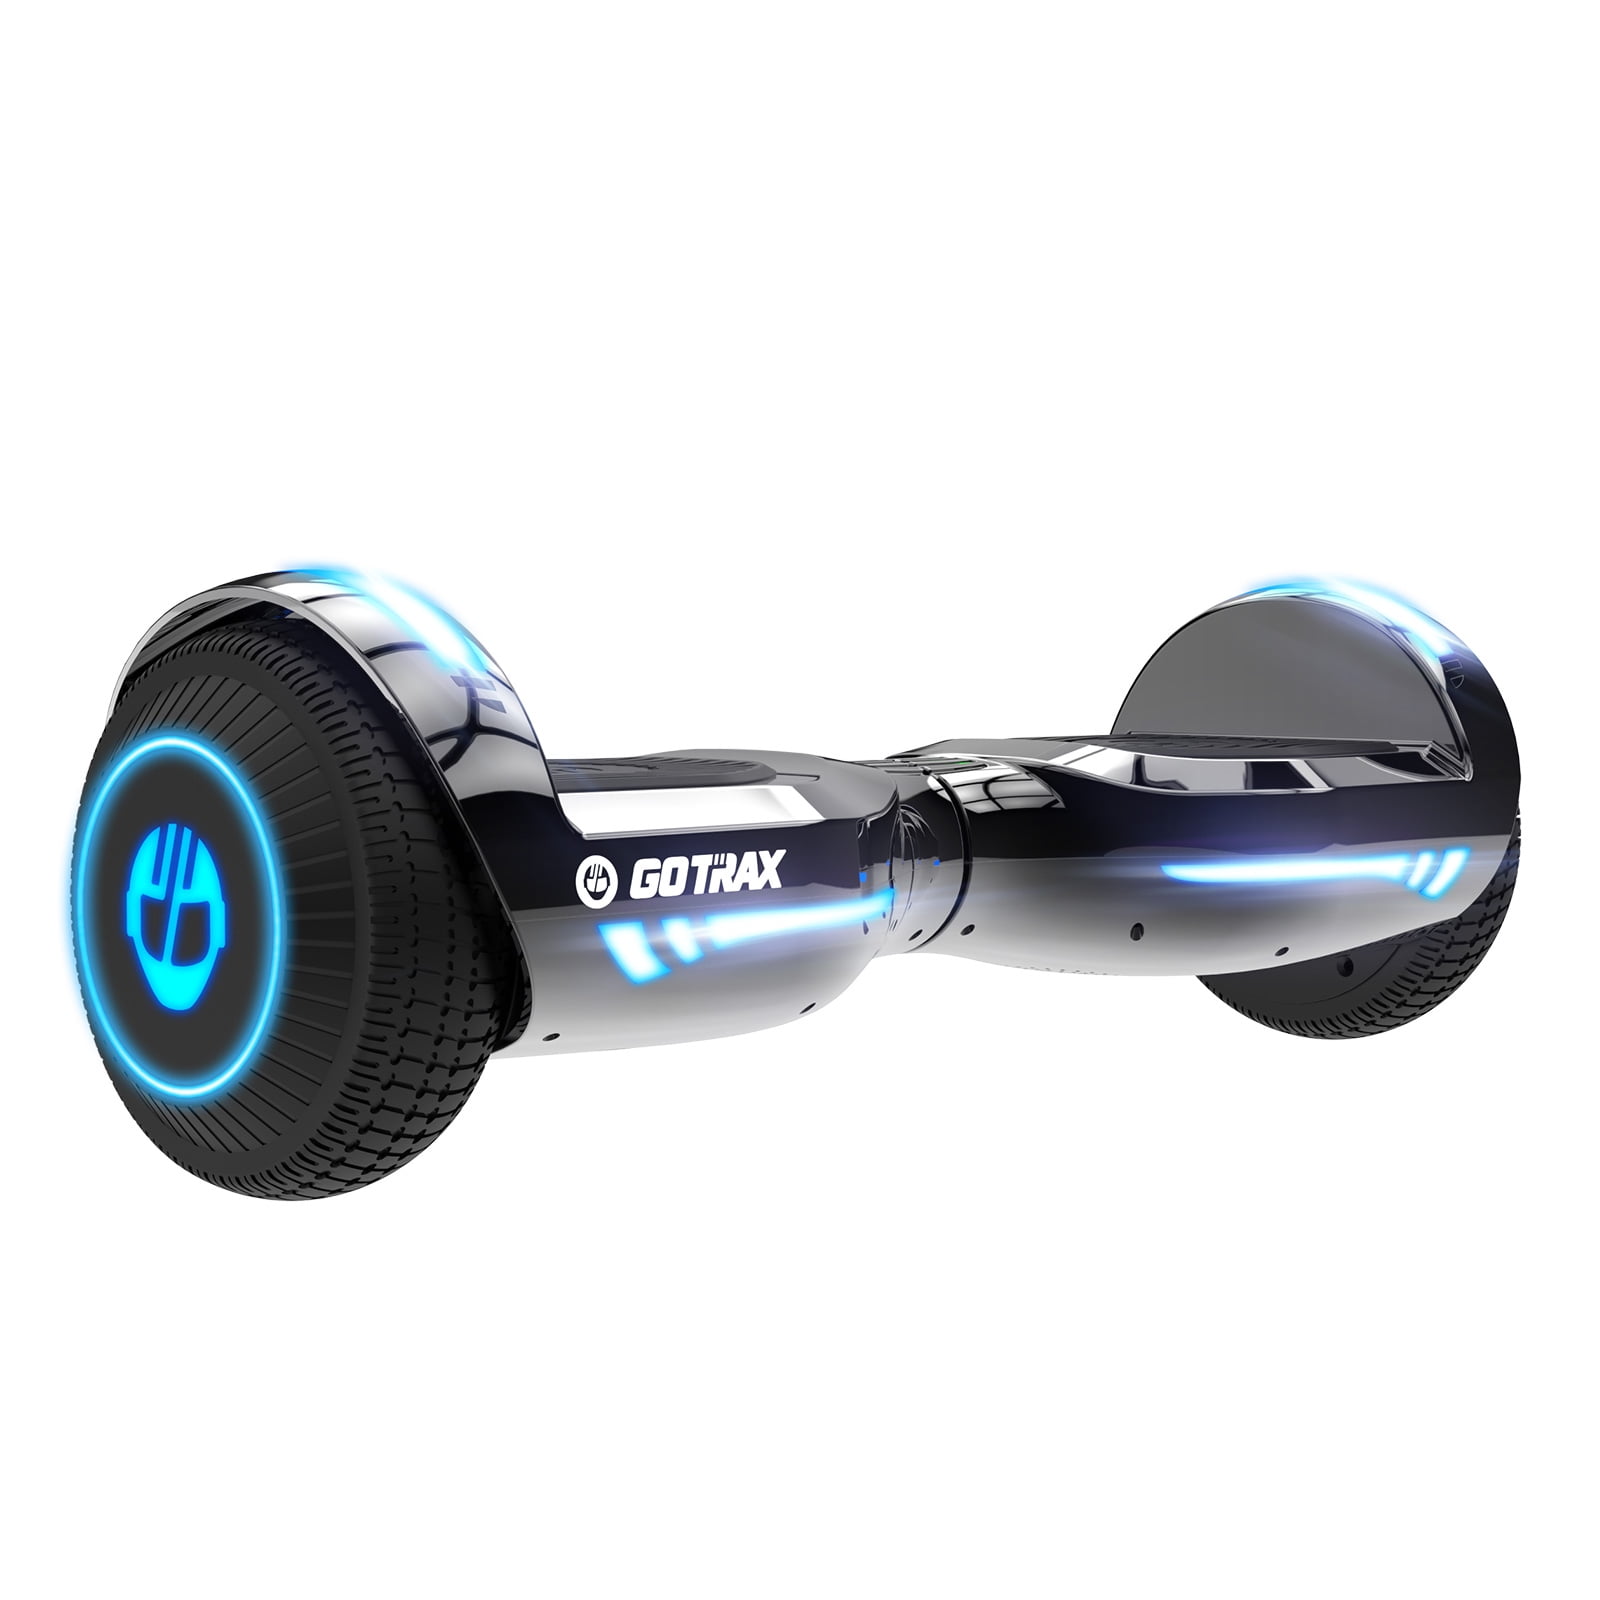 Gotrax Glide 6.5" Hoverboard for Kids Ages 6-12 with Bluetooth Speaker and led lights, Silver